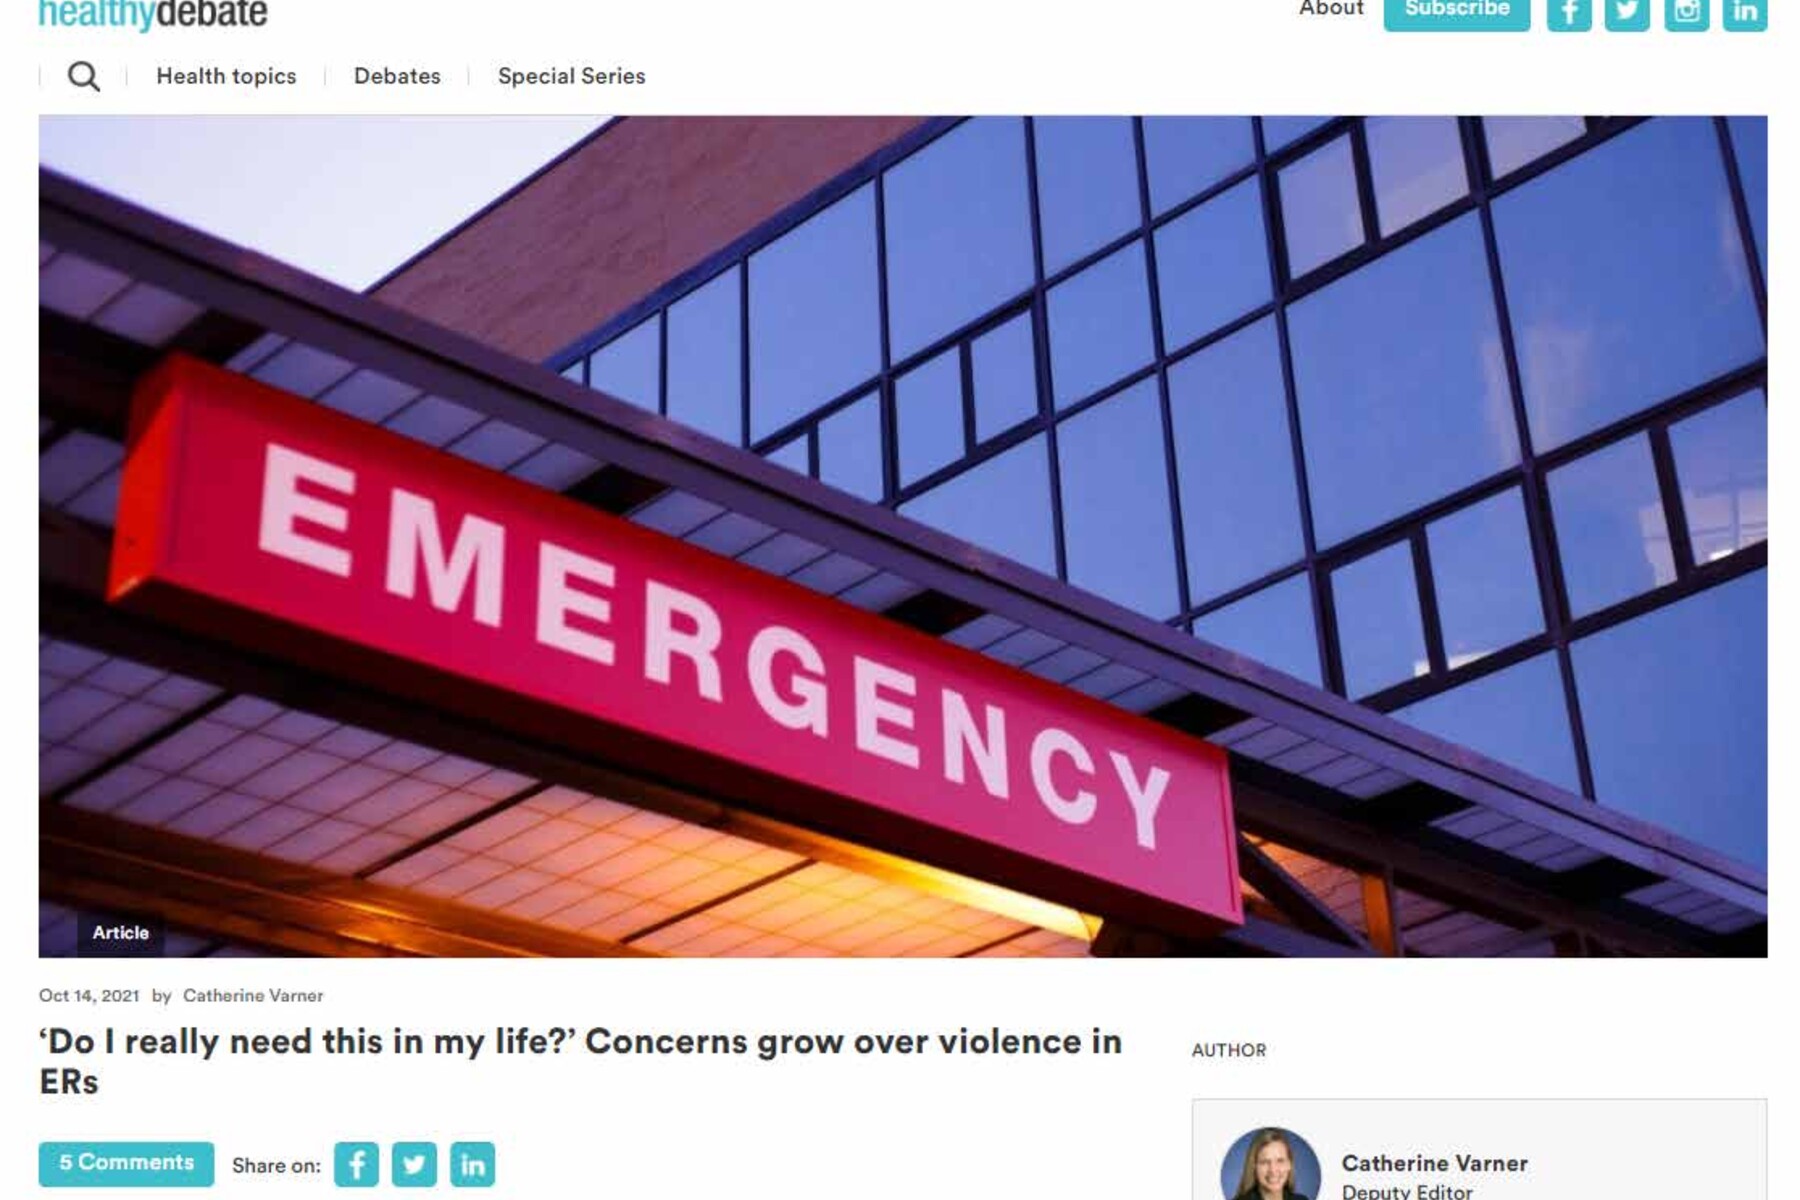 Catherine Varner Healthy Debate article screenshot - 'Do I really need this in my life?' Concerns grow over violence in ERs